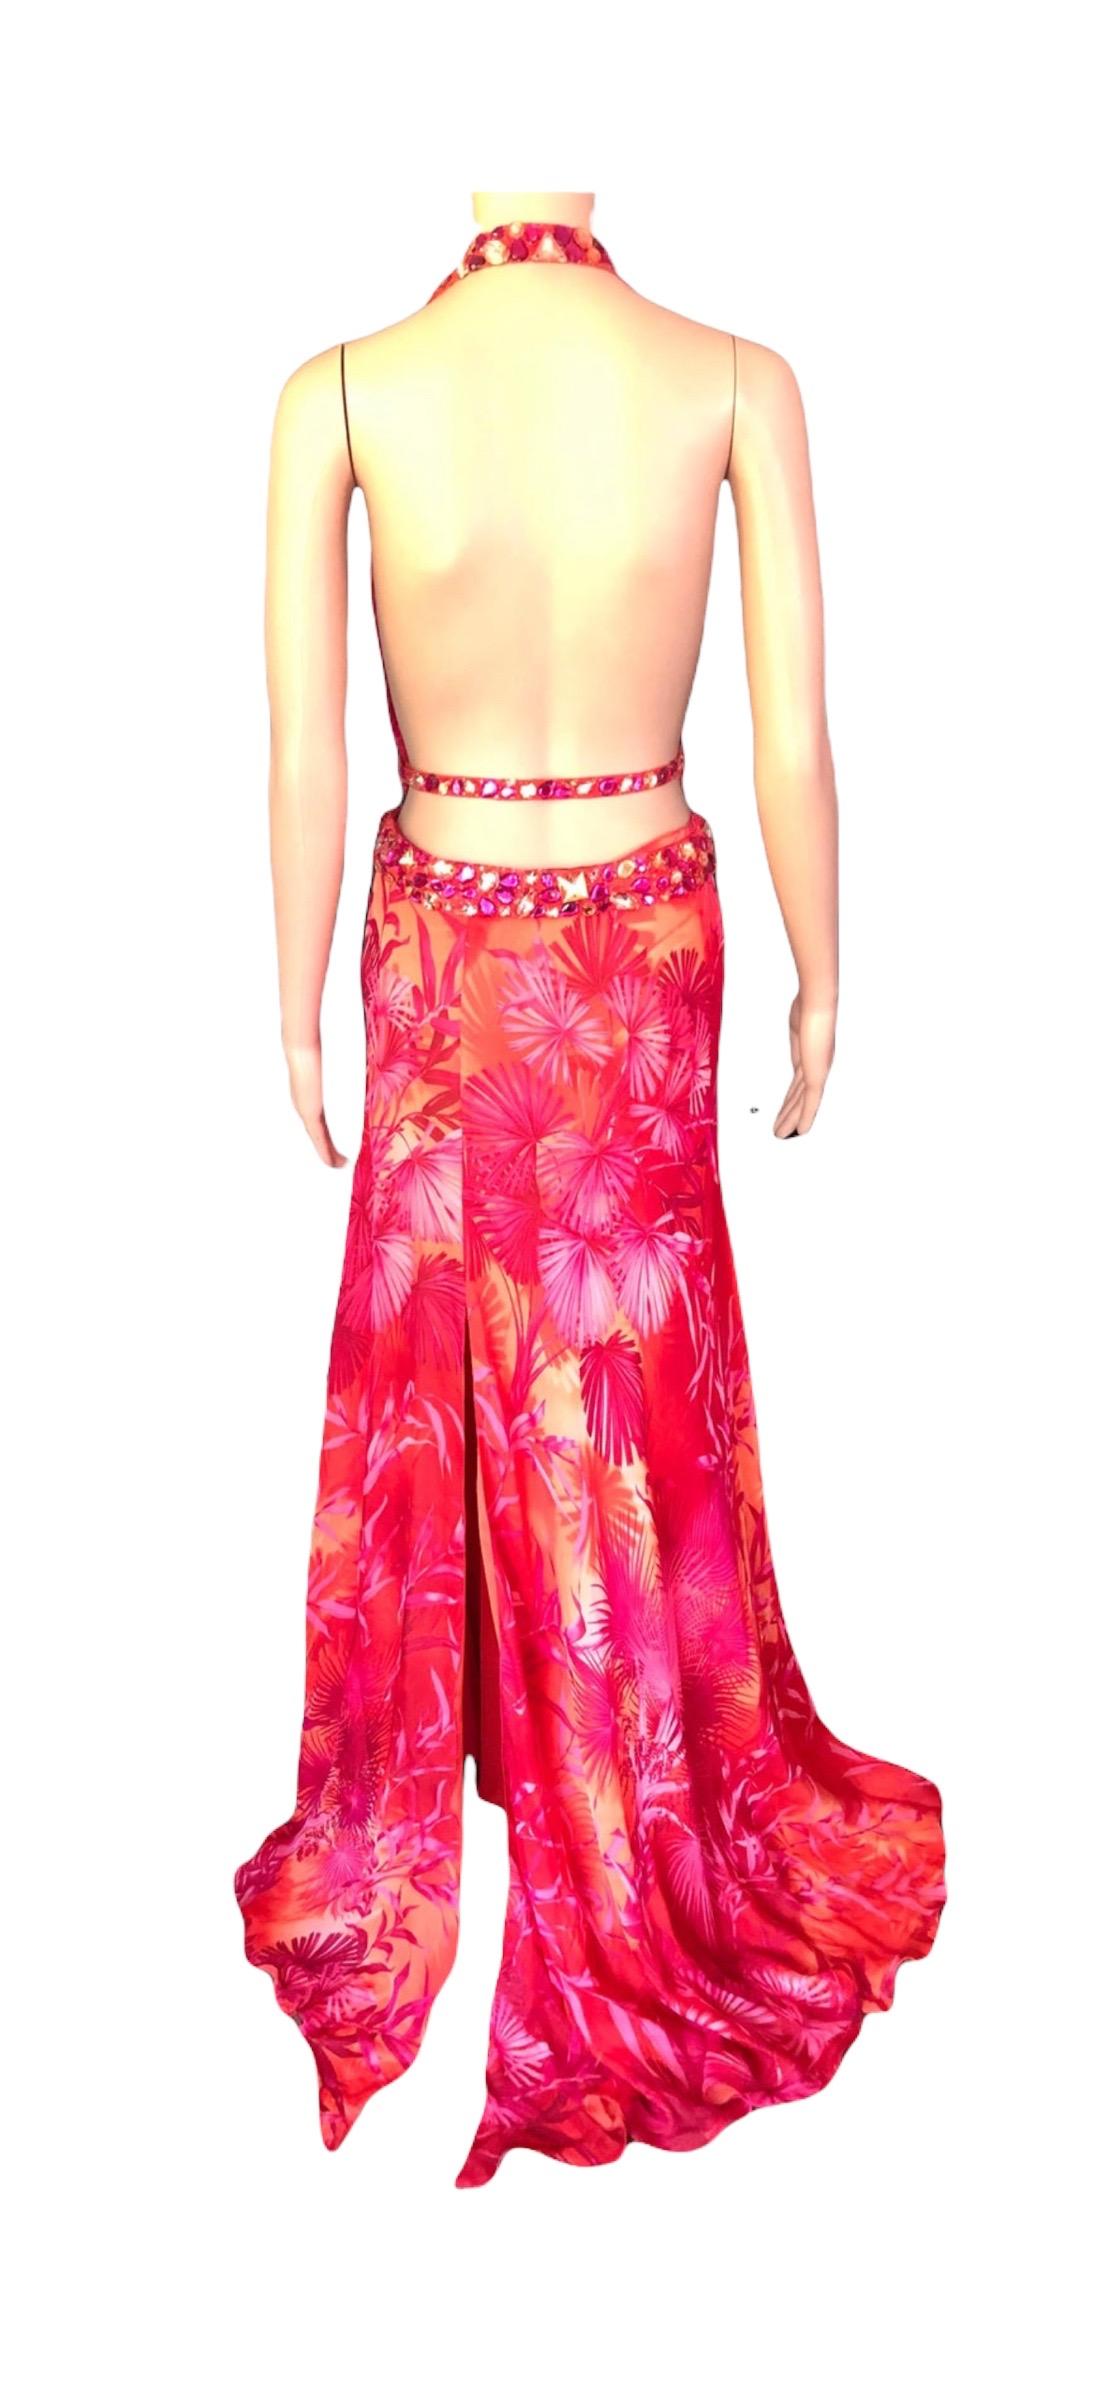 Gianni Versace S/S 2000 Runway Embellished Jungle Print Evening Dress Gown For Sale 11